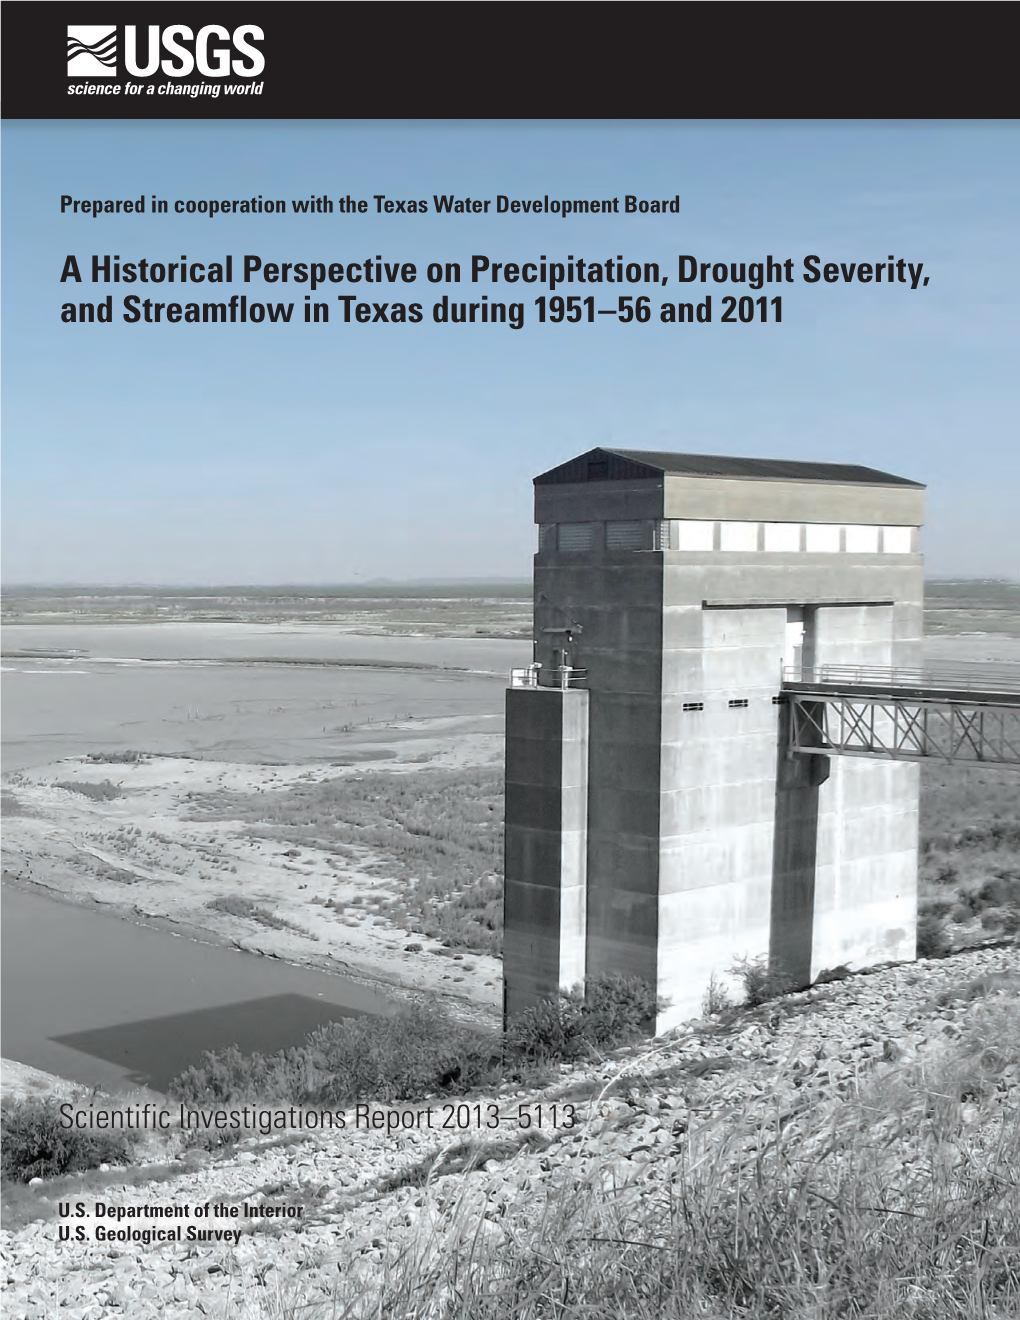 A Historical Perspective on Precipitation, Drought Severity, and Streamflow in Texas During 1951–56 and 2011